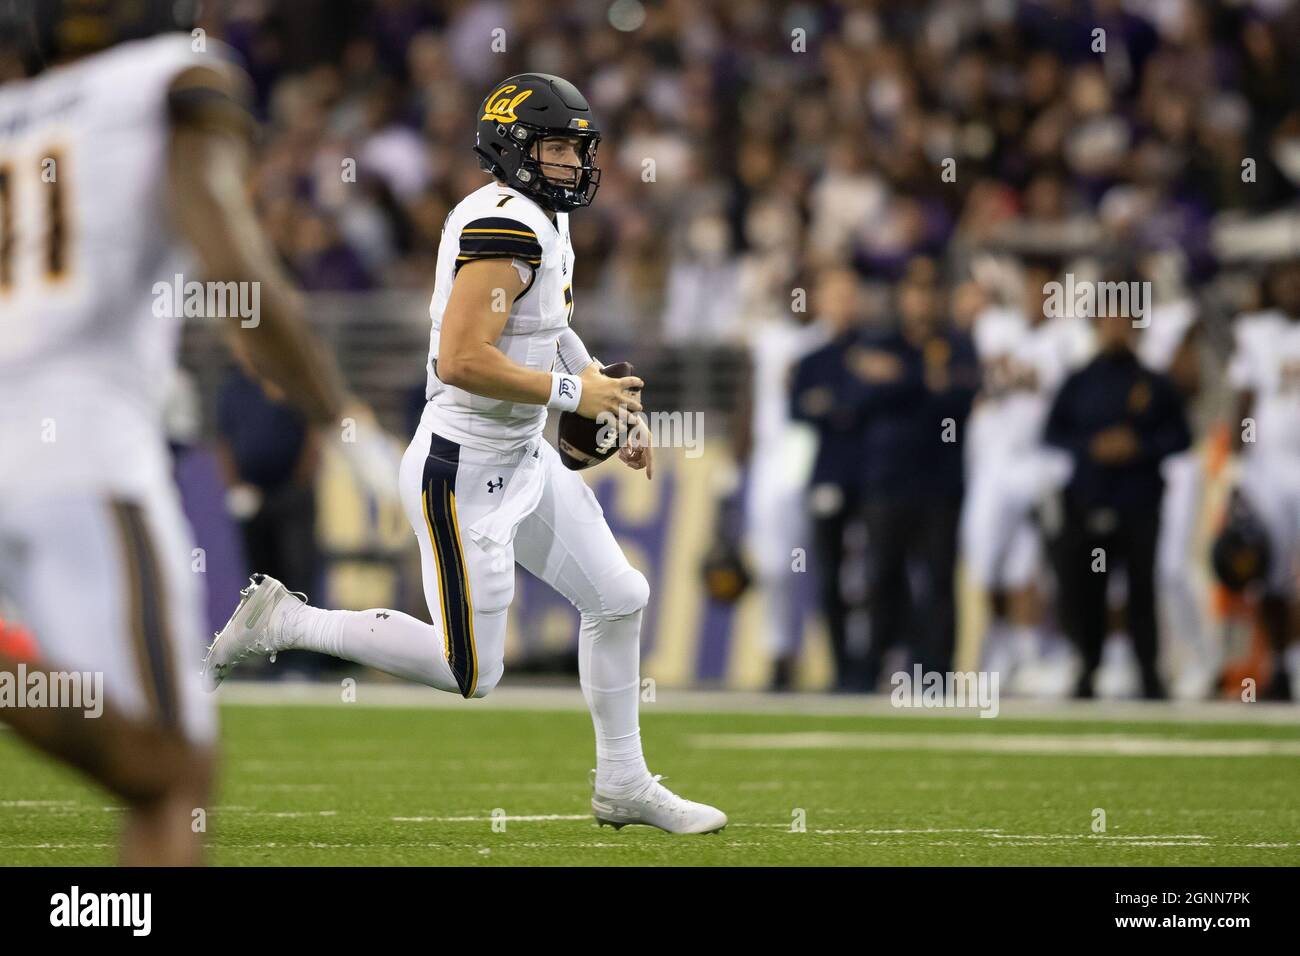 California Golden Bears quarterback Chase Garbers (7) scrambles for extra yards during the 2nd quarter of an NCAA college football game against the Wa Stock Photo